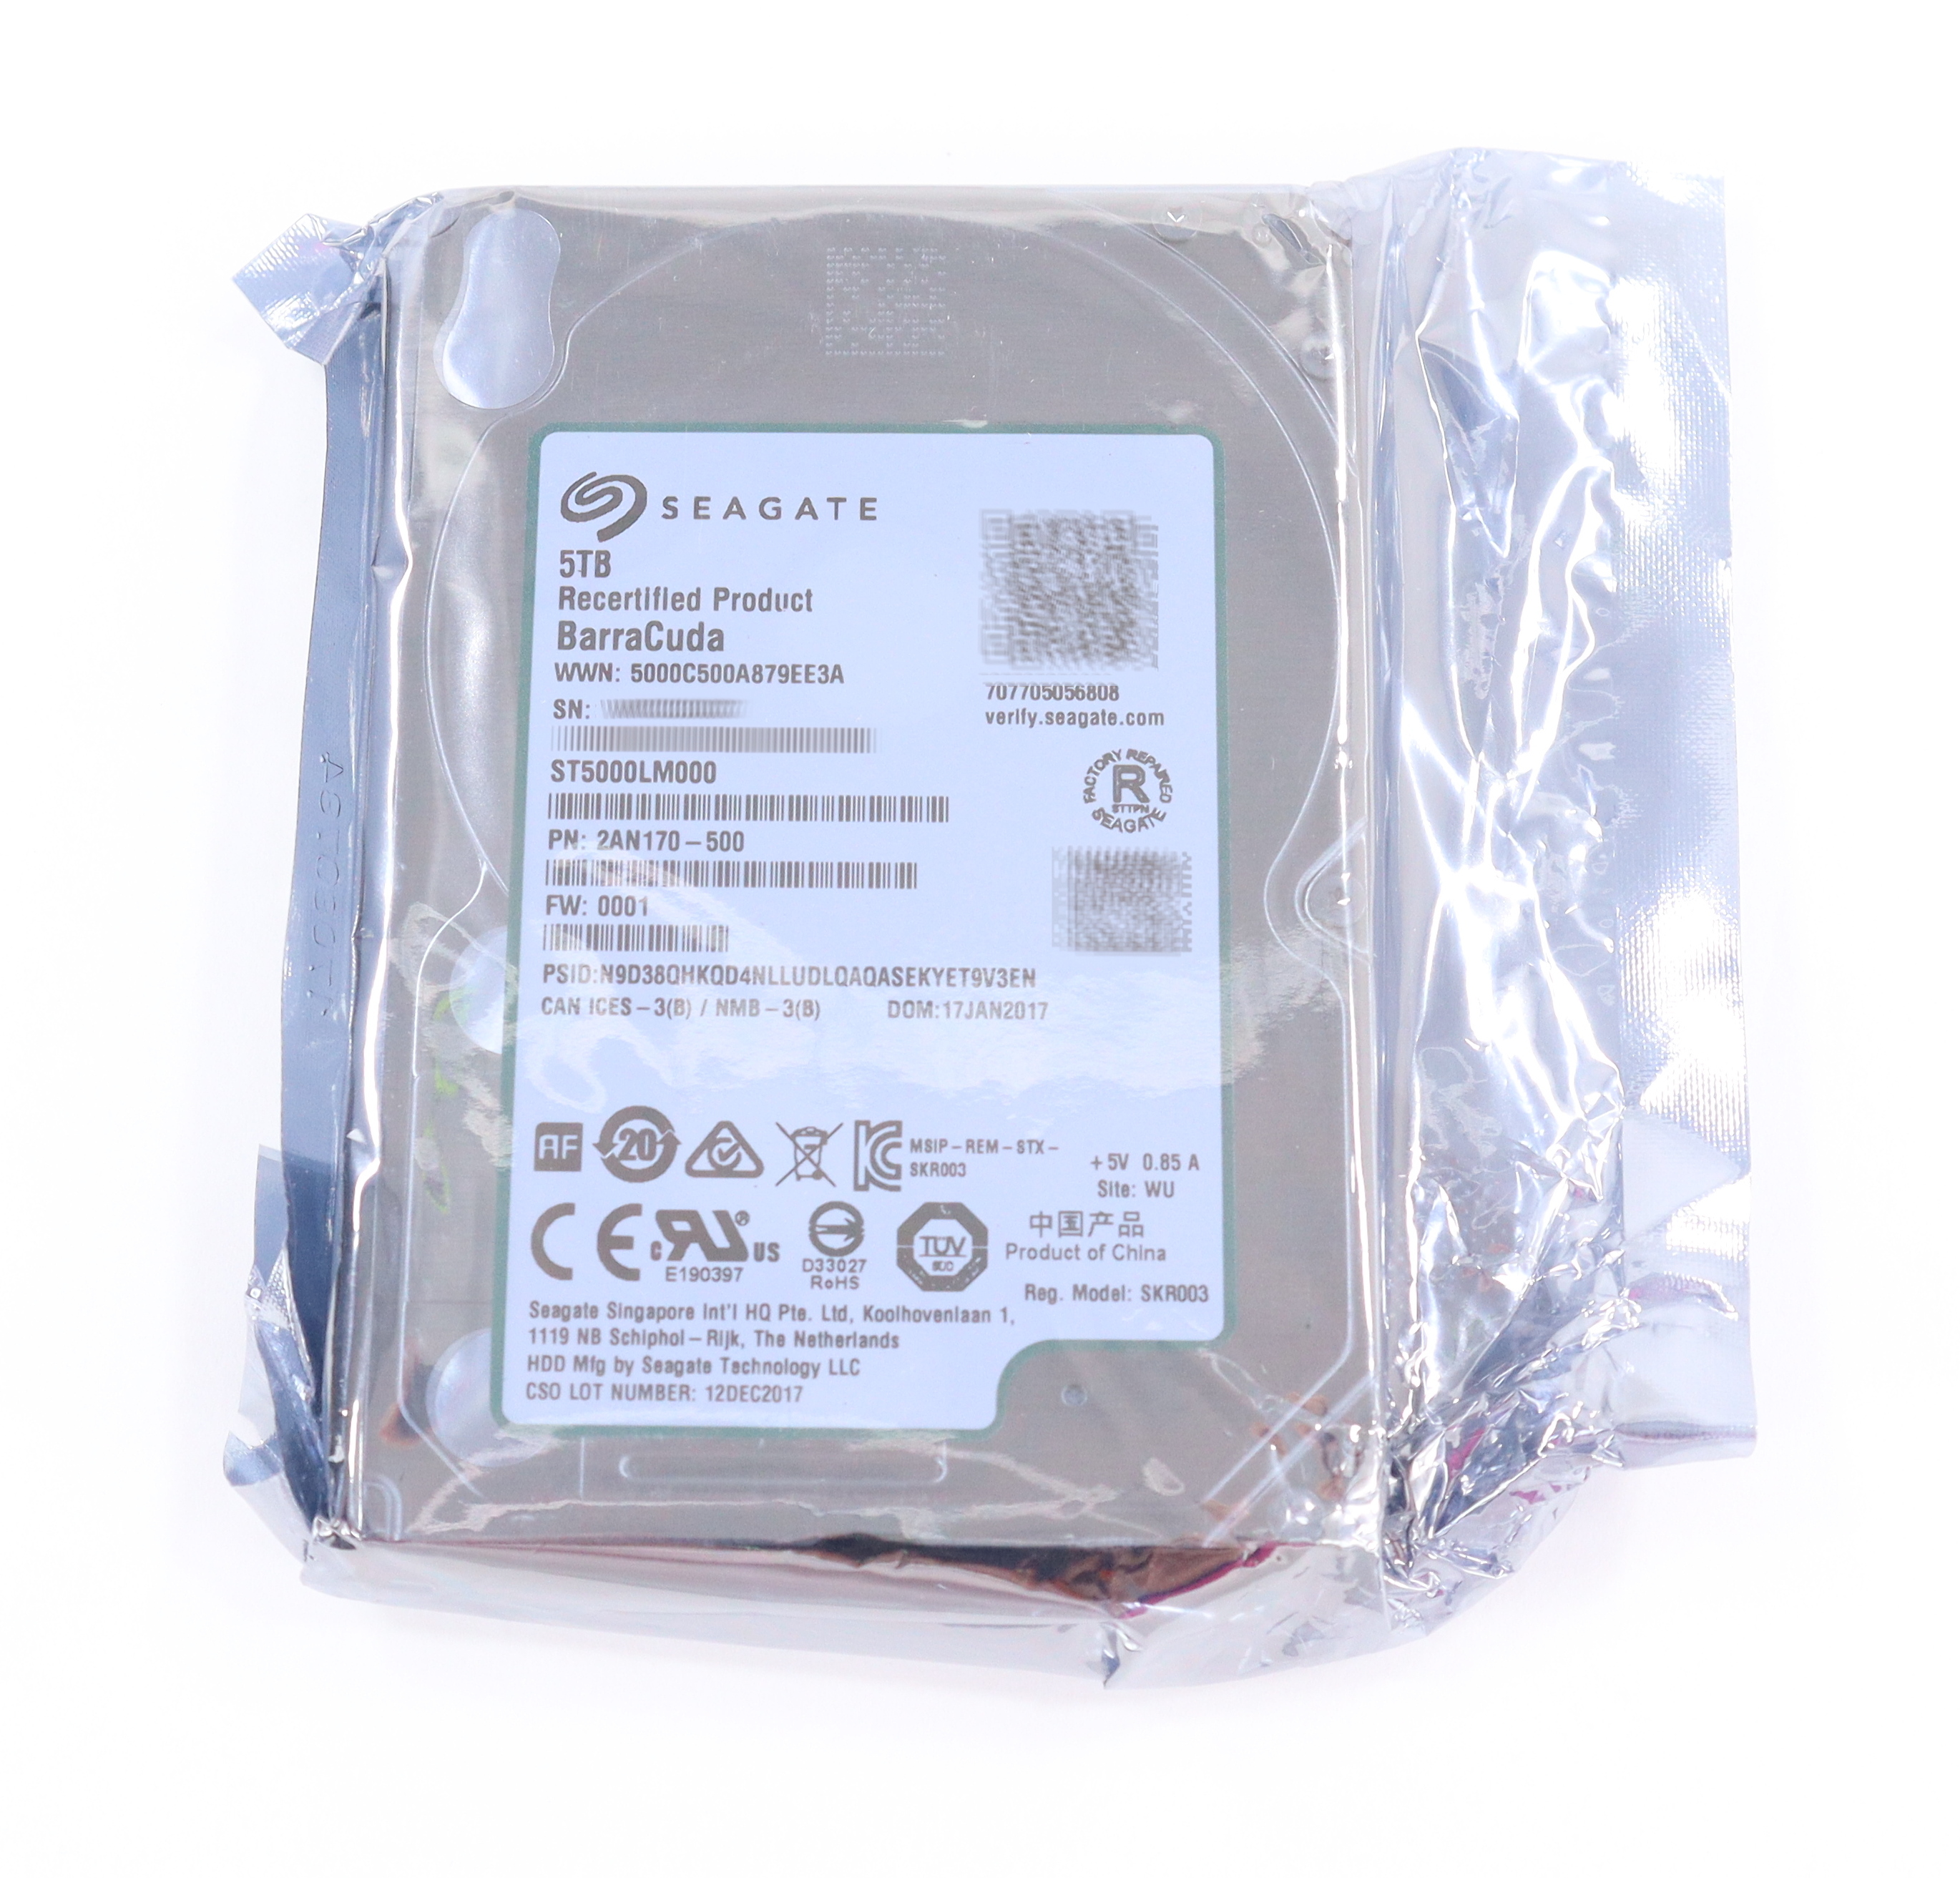 Seagate BarraCuda 5TB Internal 2.5" (ST5000LM000) HDD 2AN170-500 - Click Image to Close